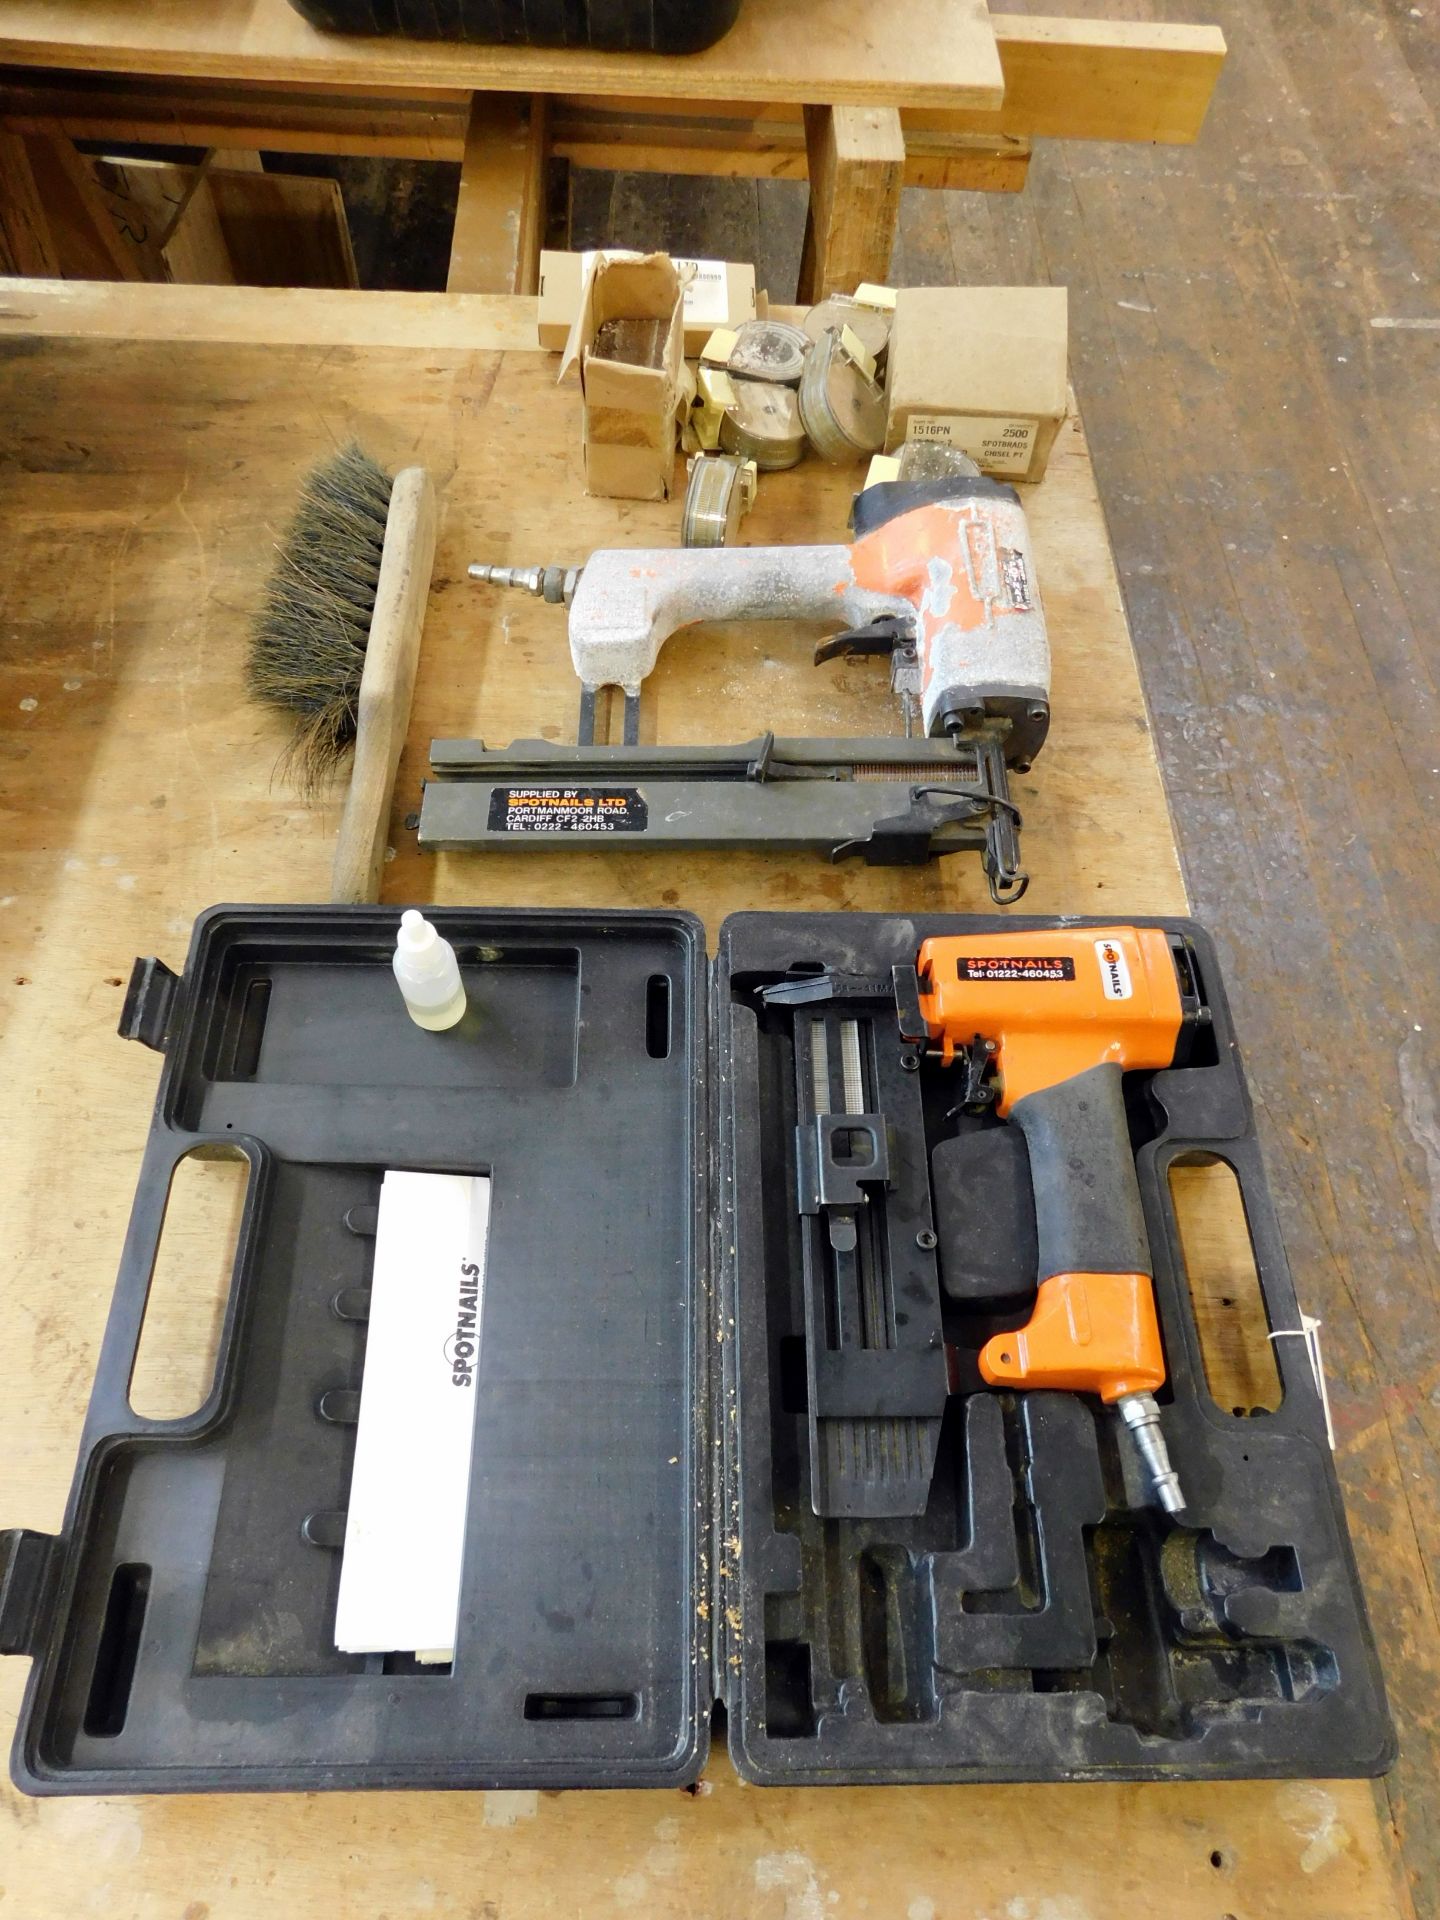 HLB 1516 Pneumatic Brad Nailer With Quantity of Nail Cartridges, Wood & Spot Nails Together with